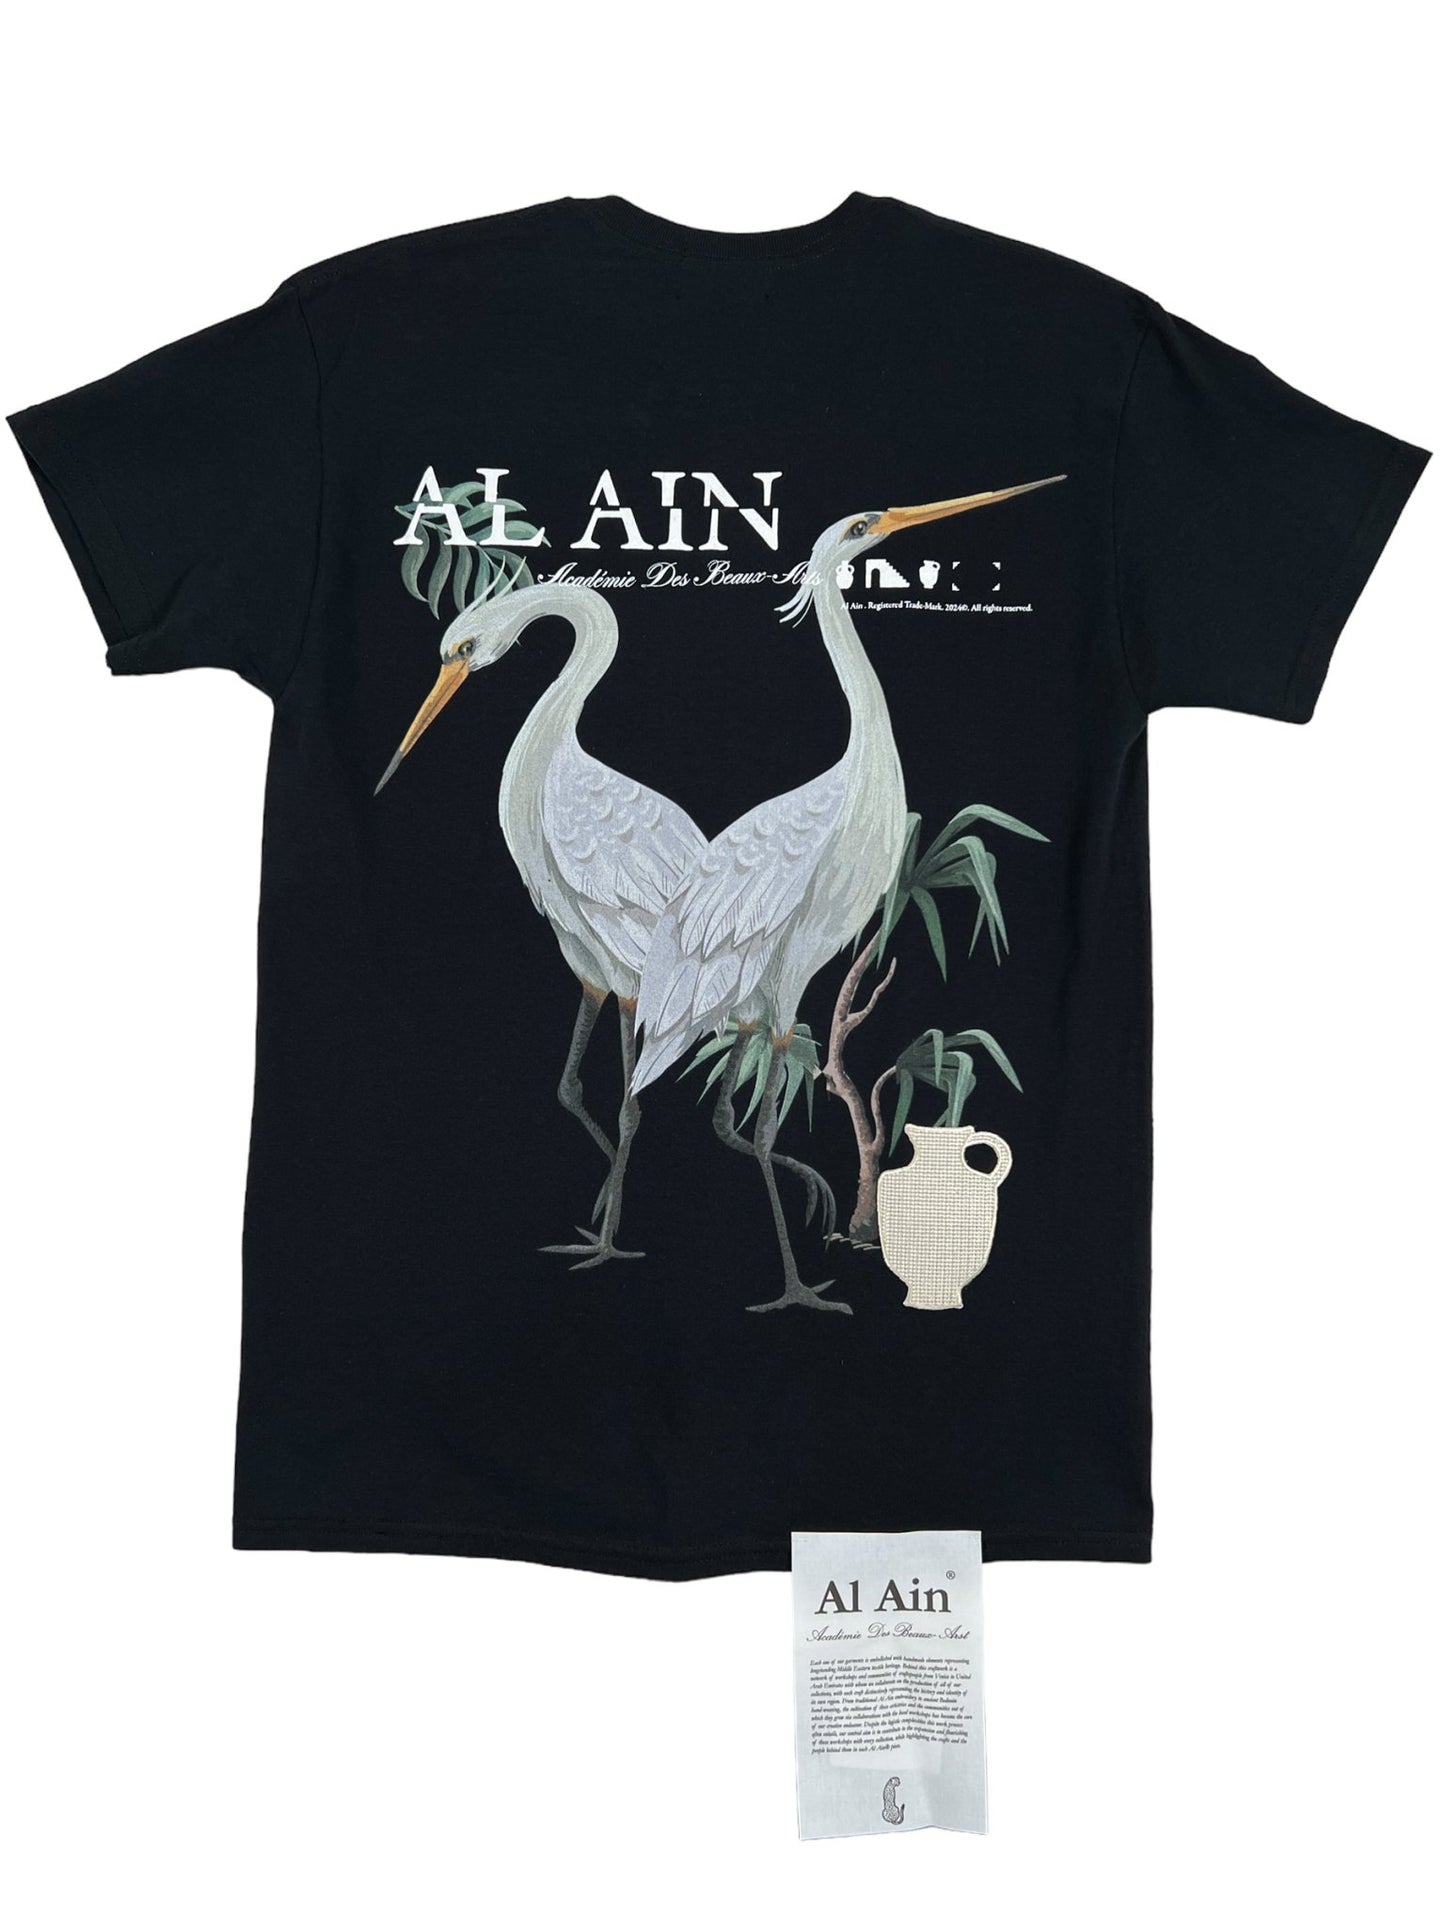 Black AL AIN t-shirt with an embroidered AL AIN AMHX S120 JABALIA NOIR graphic design featuring a white heron, displayed with a clothing tag visible at the bottom.